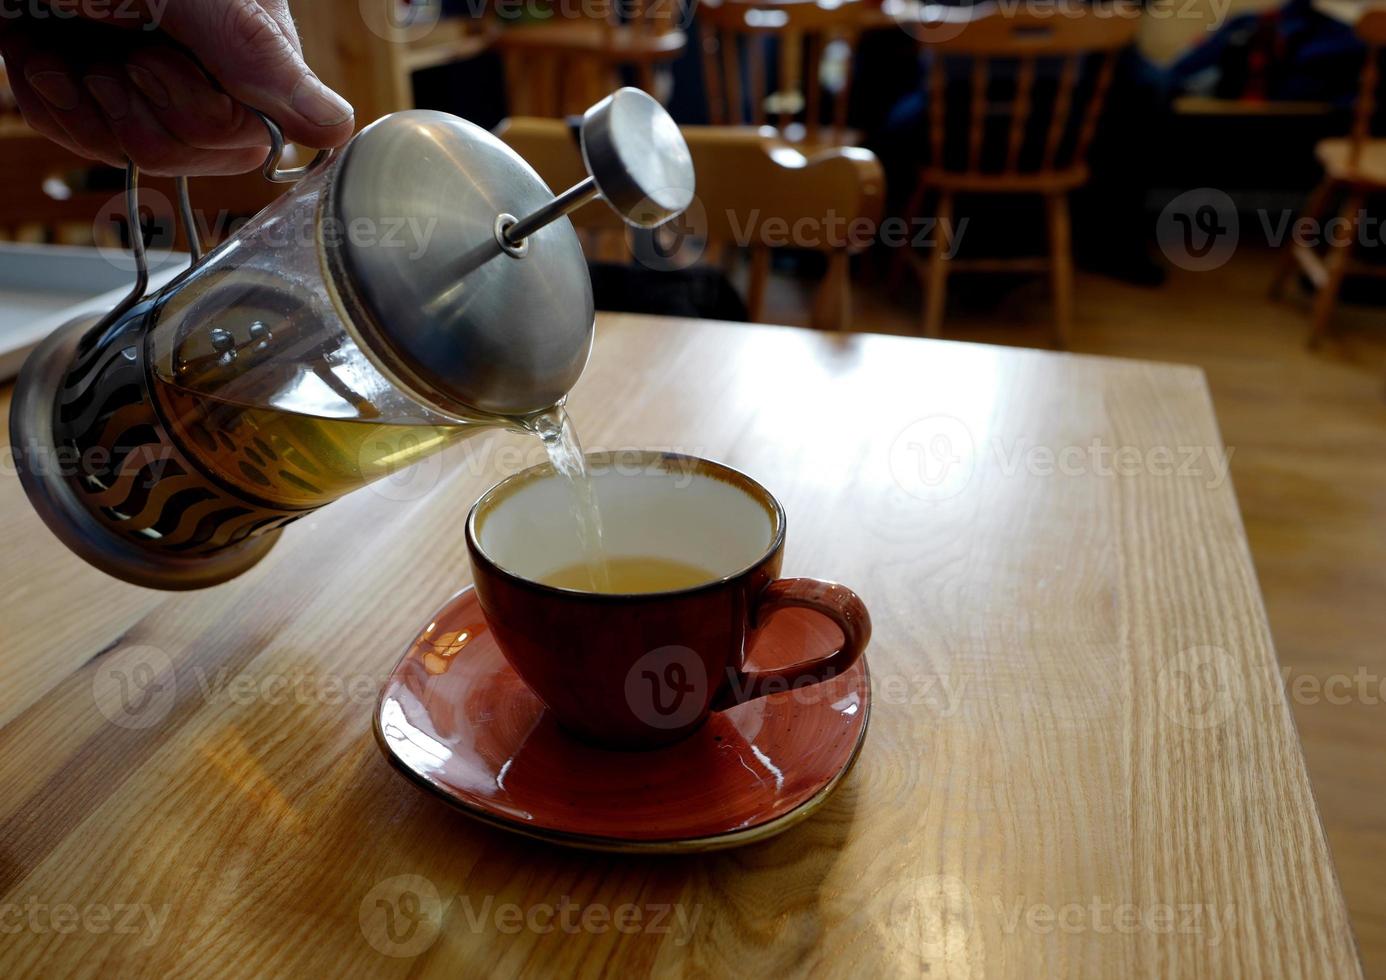 French press drink being poured into a cup photo